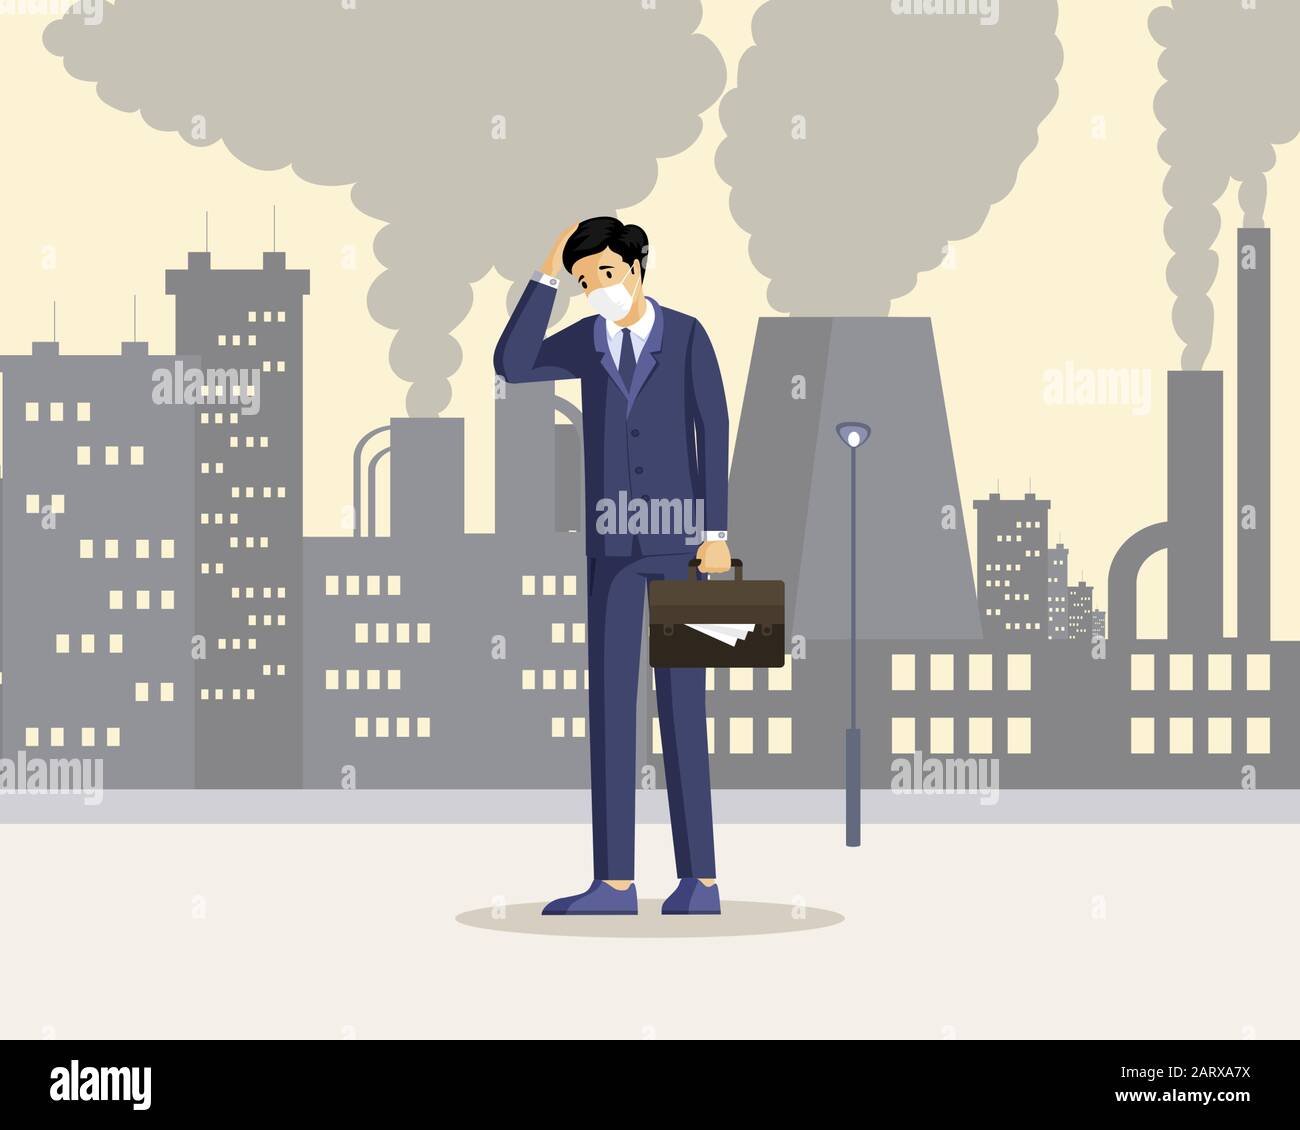 Man suffering from smog flat illustration. Male worker feeling unhealthy in polluted city, breathing dust, smoke cartoon character. Industrial emissions, urban contamination with dangerous pollutants Stock Vector